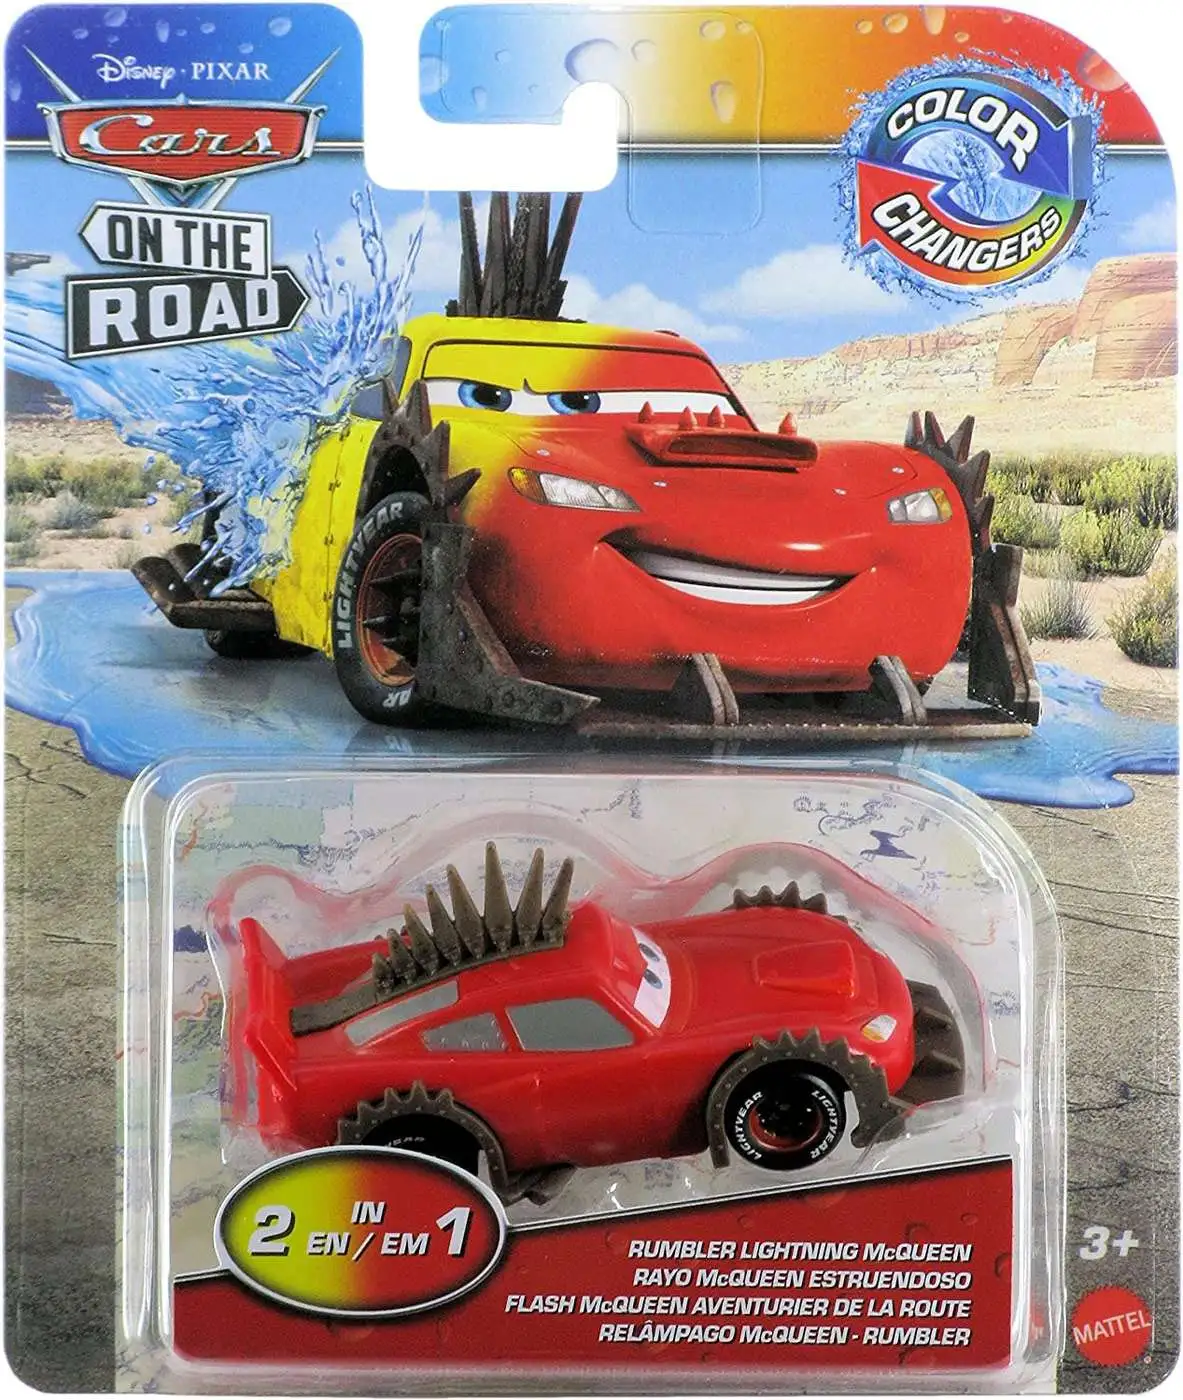 Disney Pixar Cars Lightning McQueen Character Toys for sale in Las